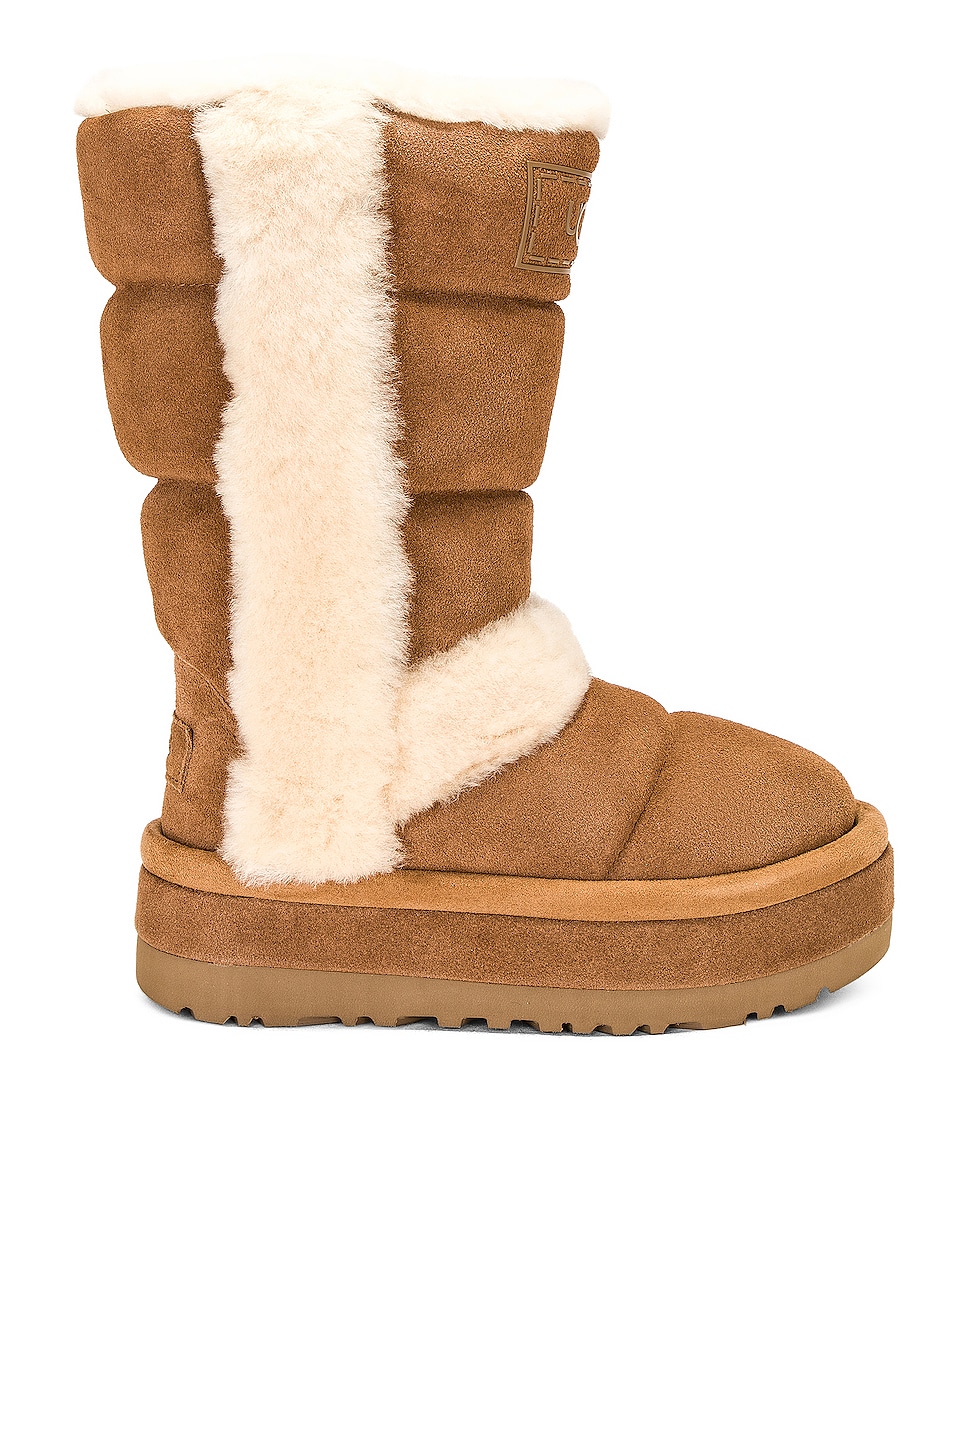 Image 1 of UGG Classic Cloudpeak Tall Boot in Chestnut